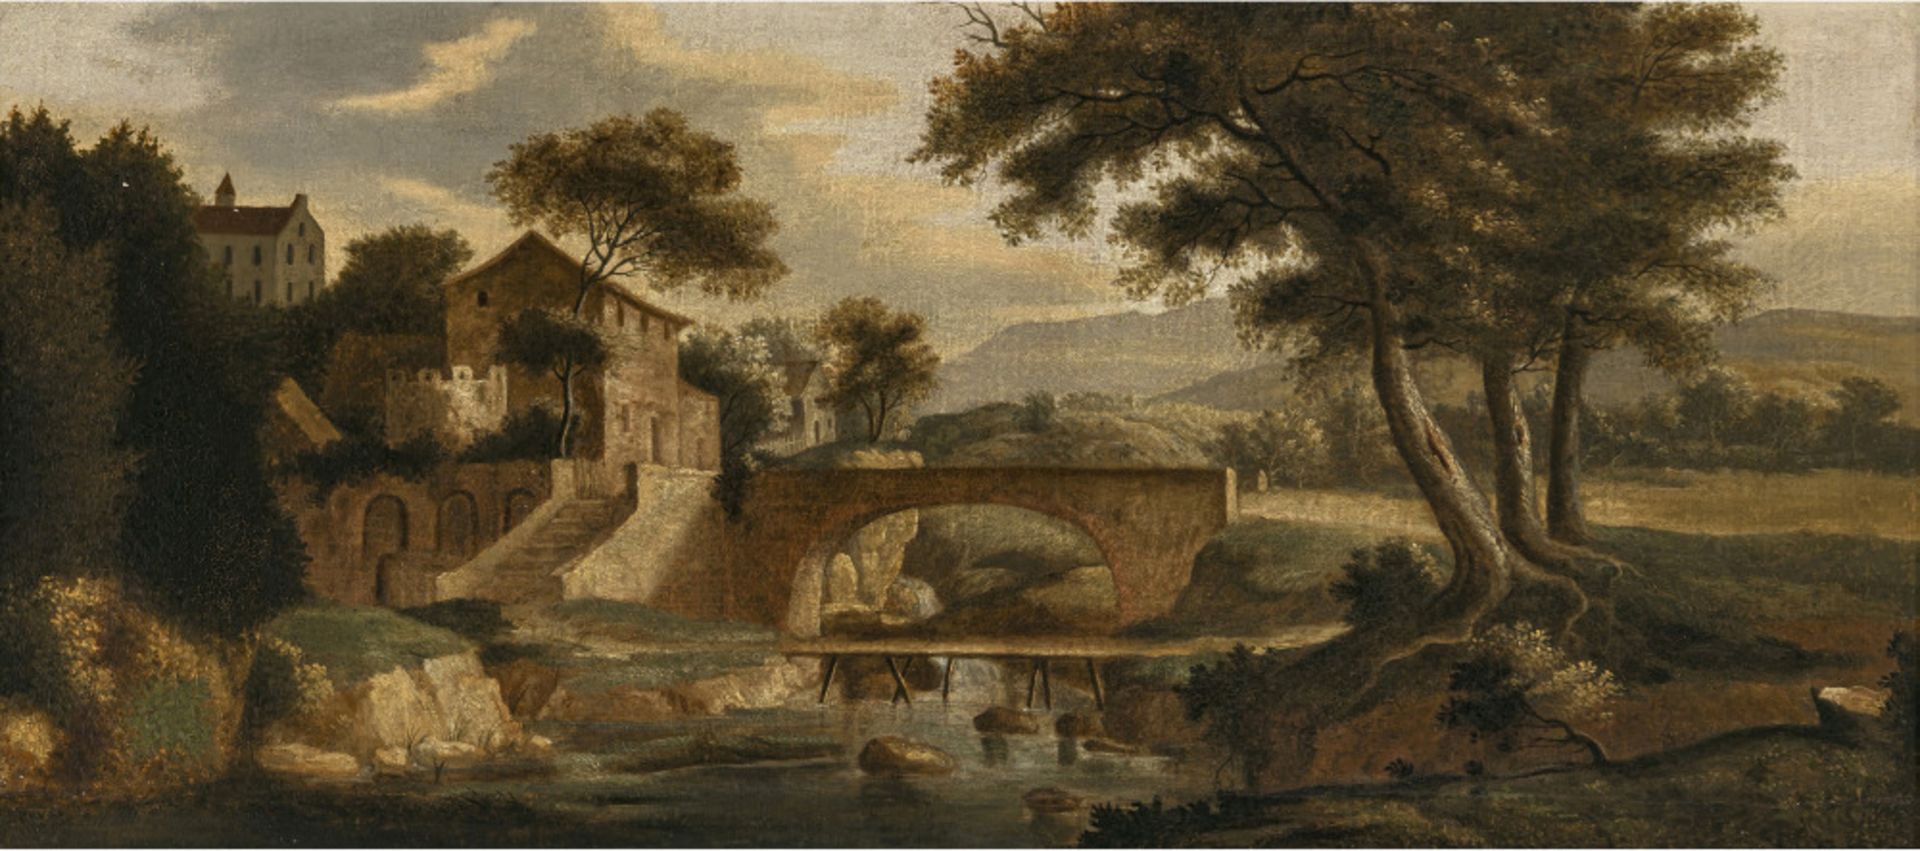 Deutsch Early 18th century - Landscapes - Image 3 of 5